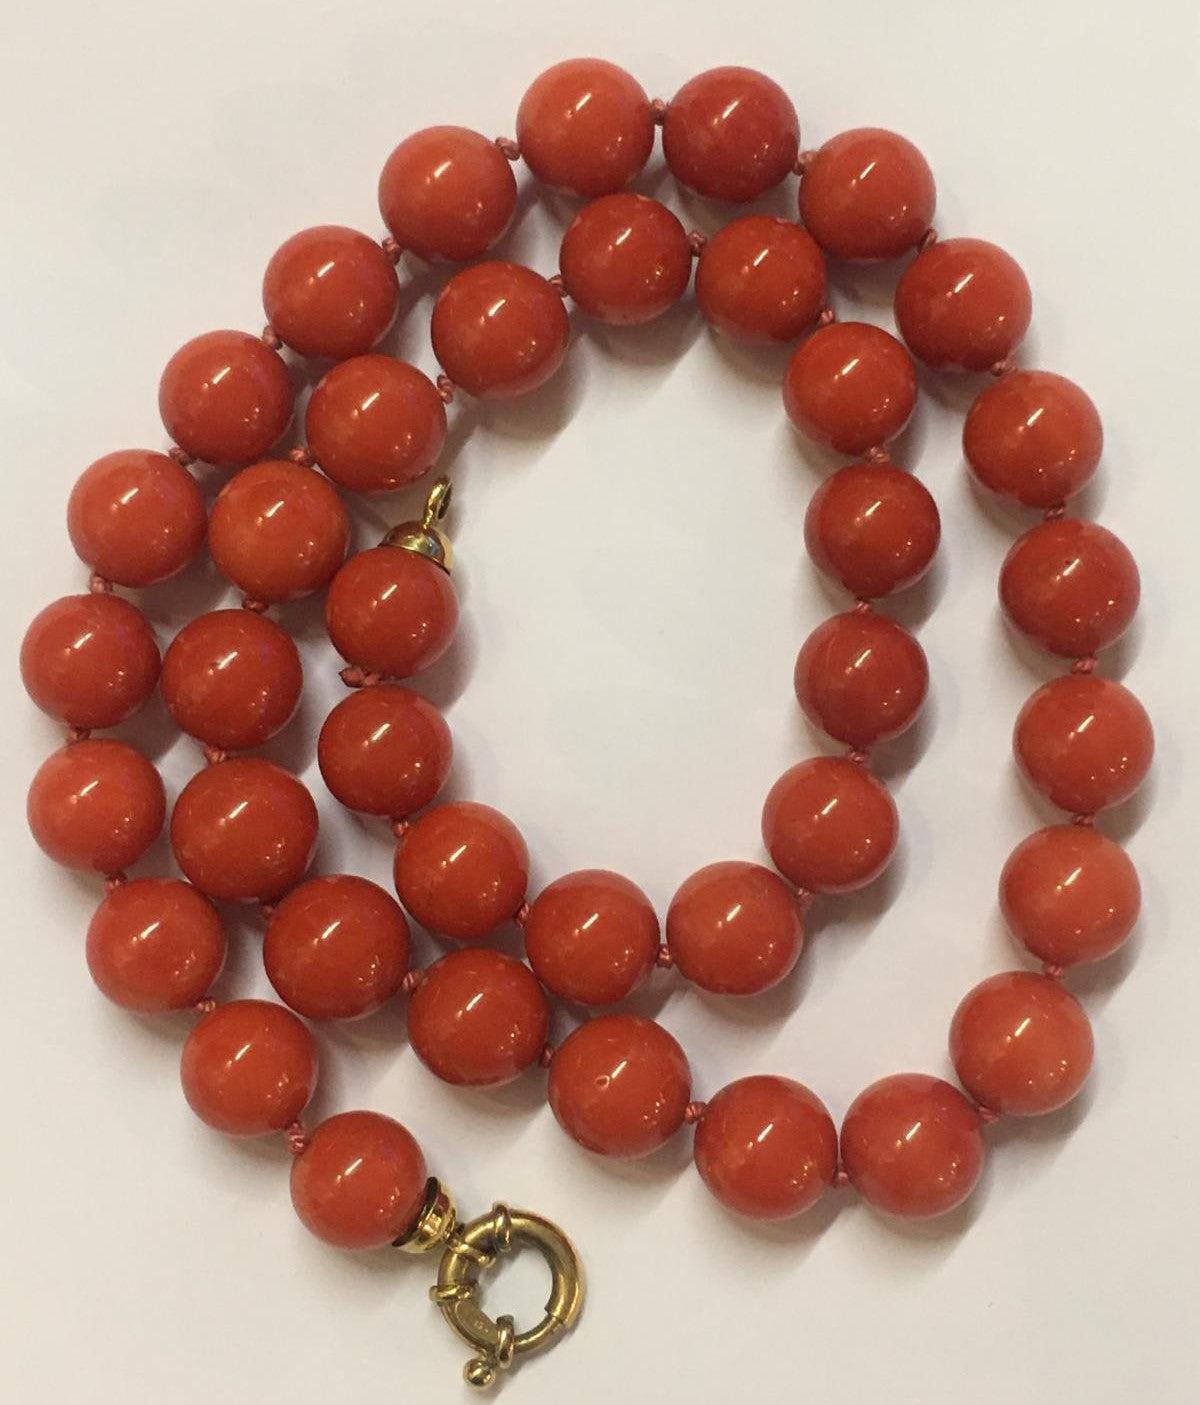 Precious Coral Necklace ⪼ Natural Red Color Coral Necklace with Gold Clasp